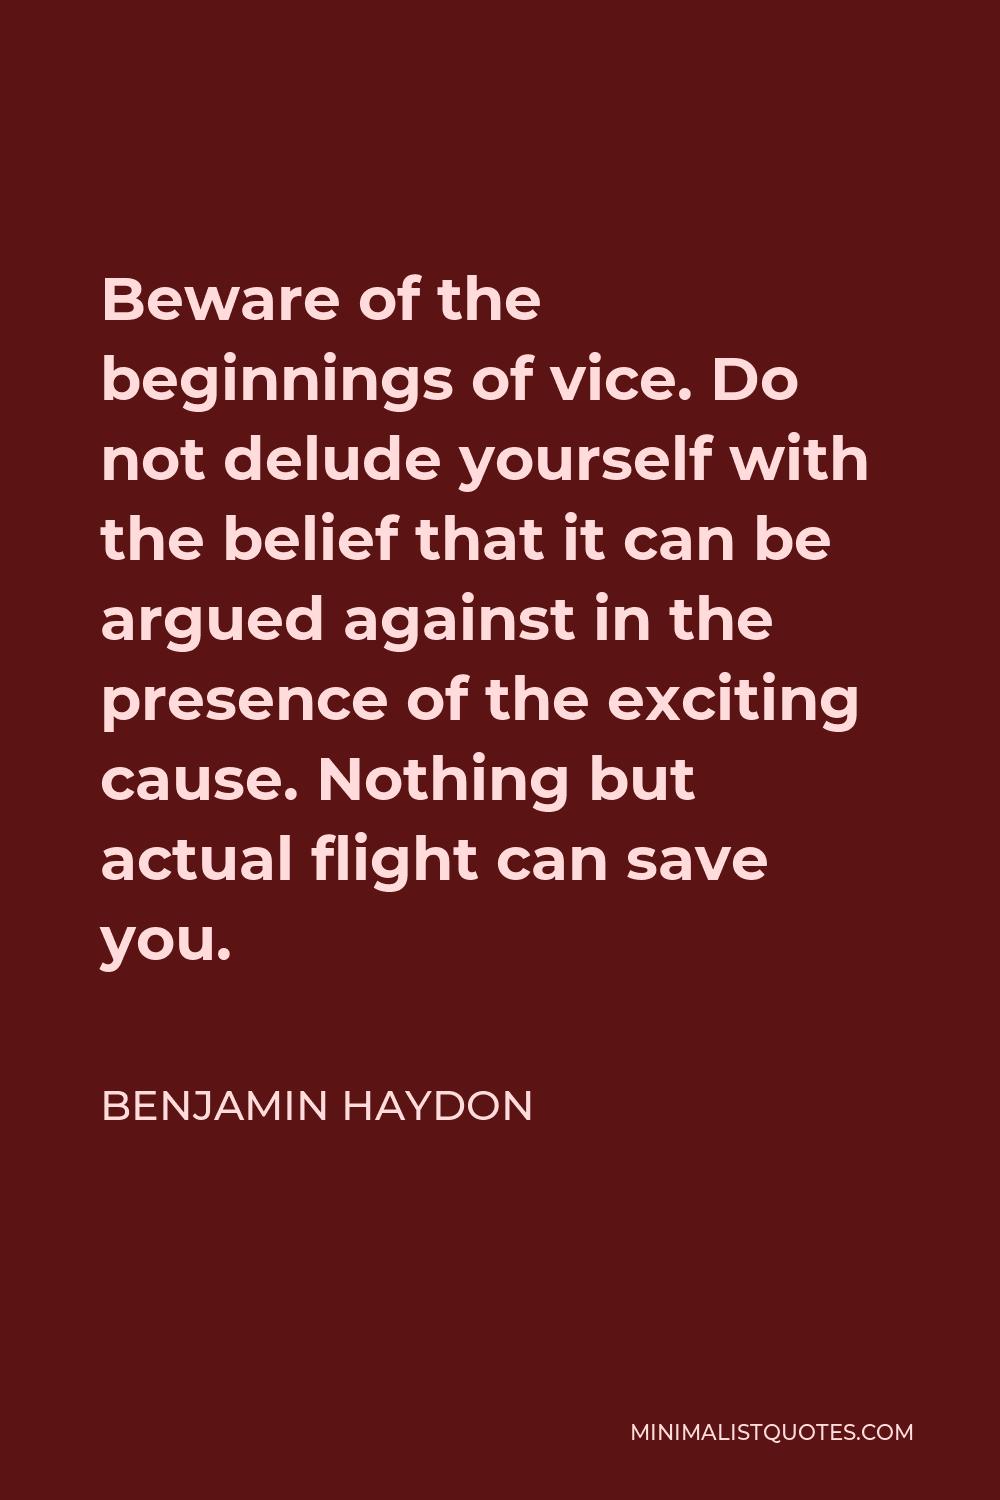 Benjamin Haydon Quote - Beware of the beginnings of vice. Do not delude yourself with the belief that it can be argued against in the presence of the exciting cause. Nothing but actual flight can save you.